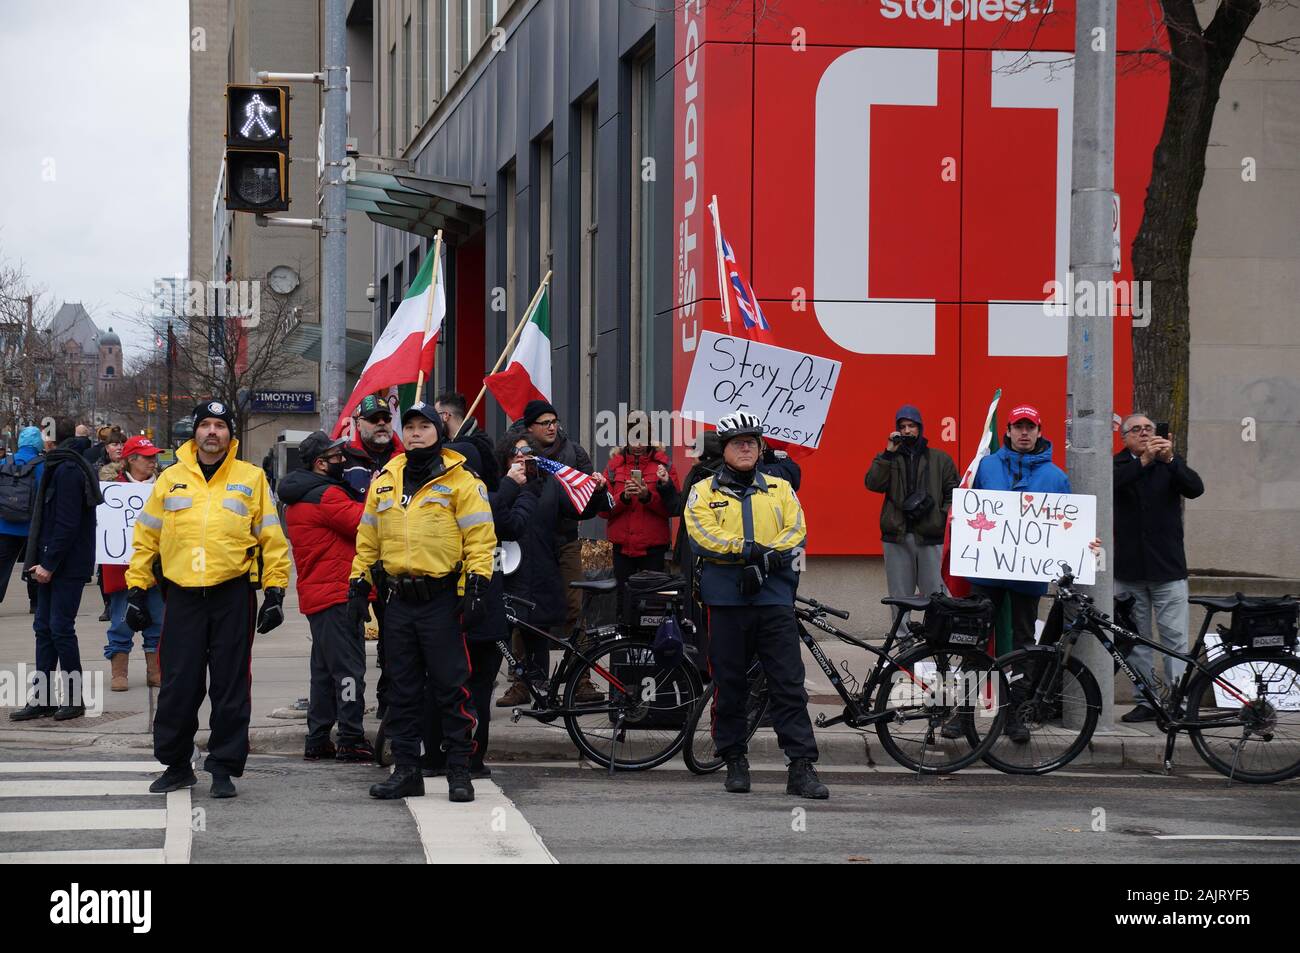 TORONTO, CANADA - 01 04 2020: Police officers guarding the rally outside U.S. Consulate in Toronto supporting US President Donald Trump's policy in Stock Photo